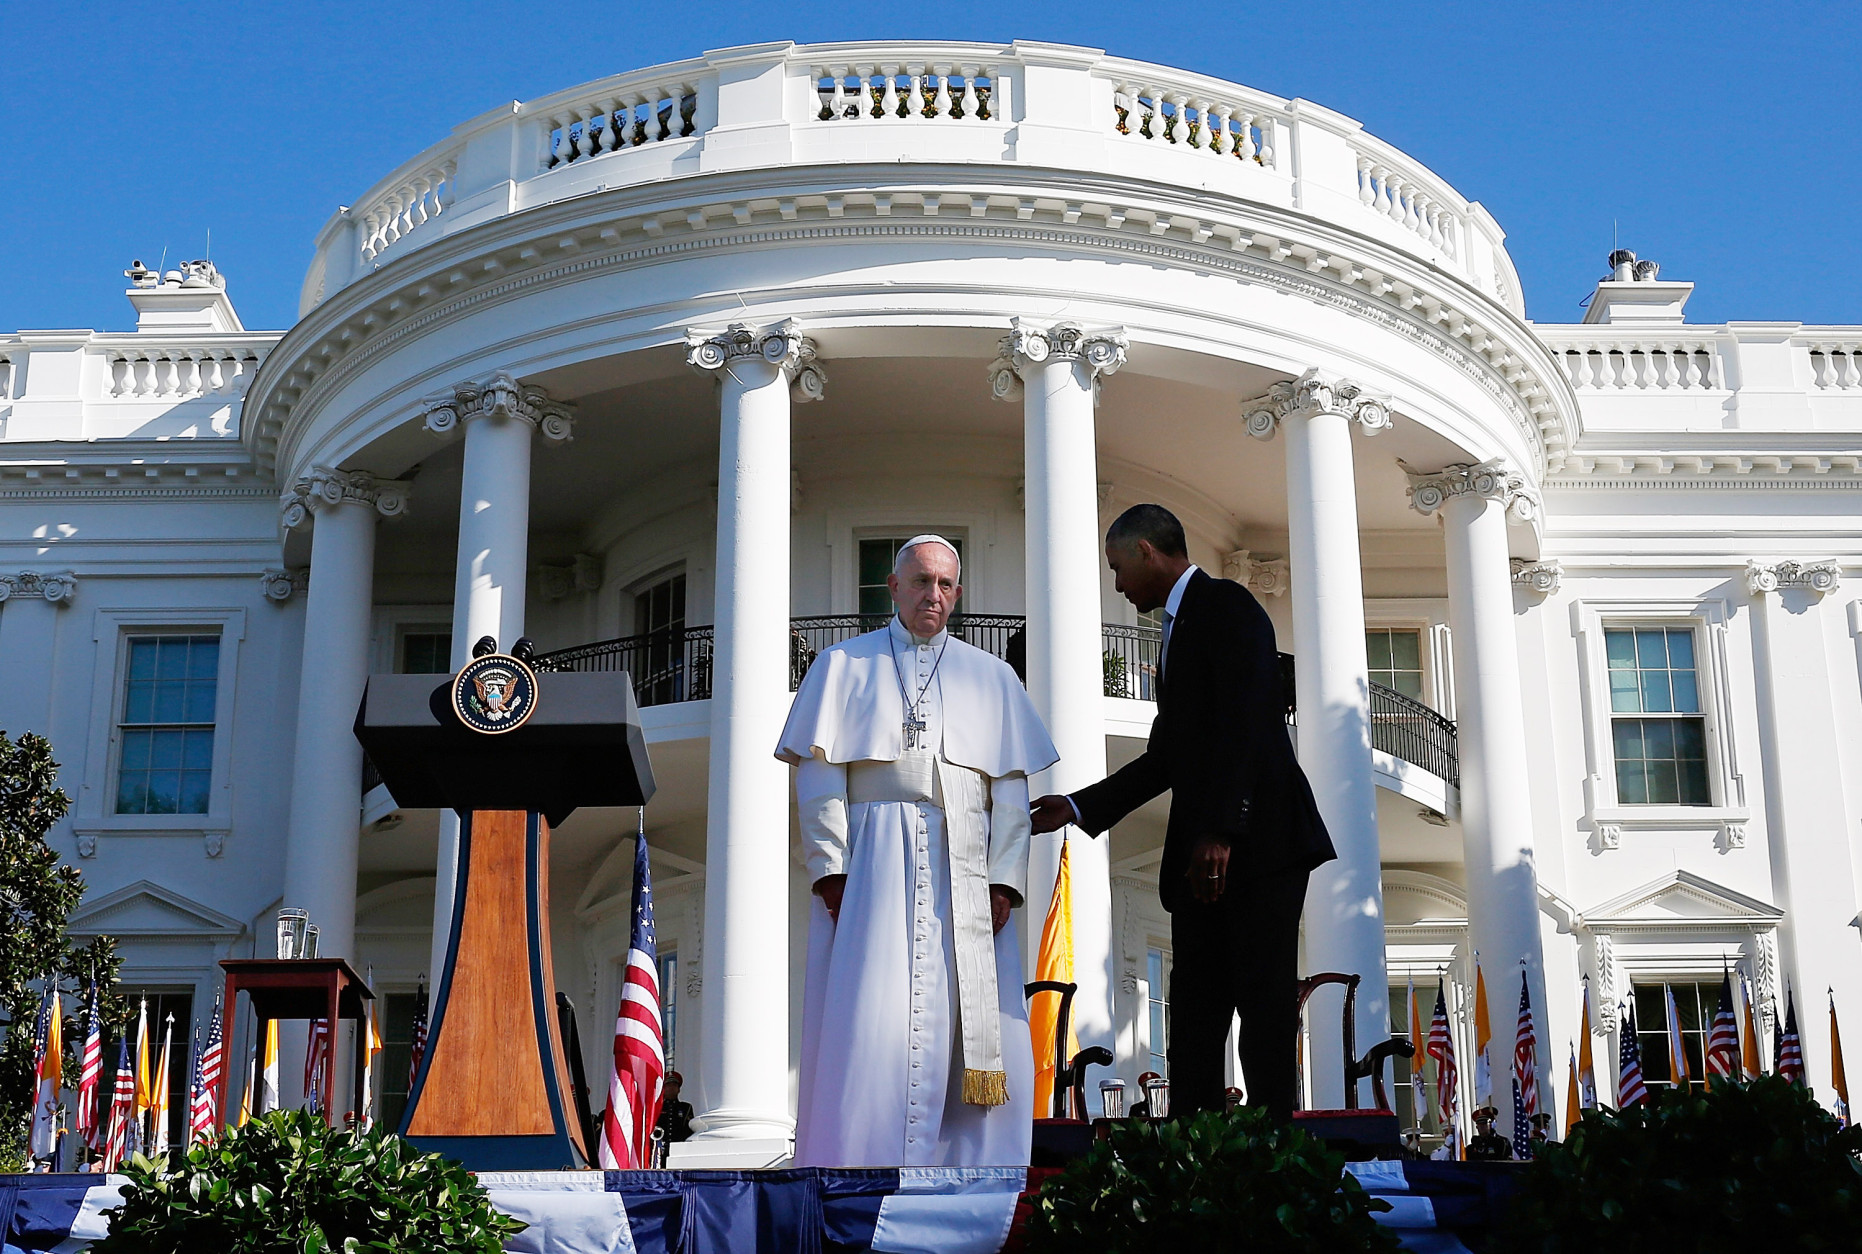 WASHINGTON, DC - SEPTEMBER 23:  U.S. President Barack Obama (R) welcomes Pope Francis (L) during an arrival ceremony at the White House on September 23, 2015 in Washington, DC. The Pope begins his first trip to the United States at the White House followed by a visit to St. Matthew's Cathedral, and will then hold a Mass on the grounds of the Basilica of the National Shrine of the Immaculate Conception.  (Photo by Win McNamee/Getty Images)